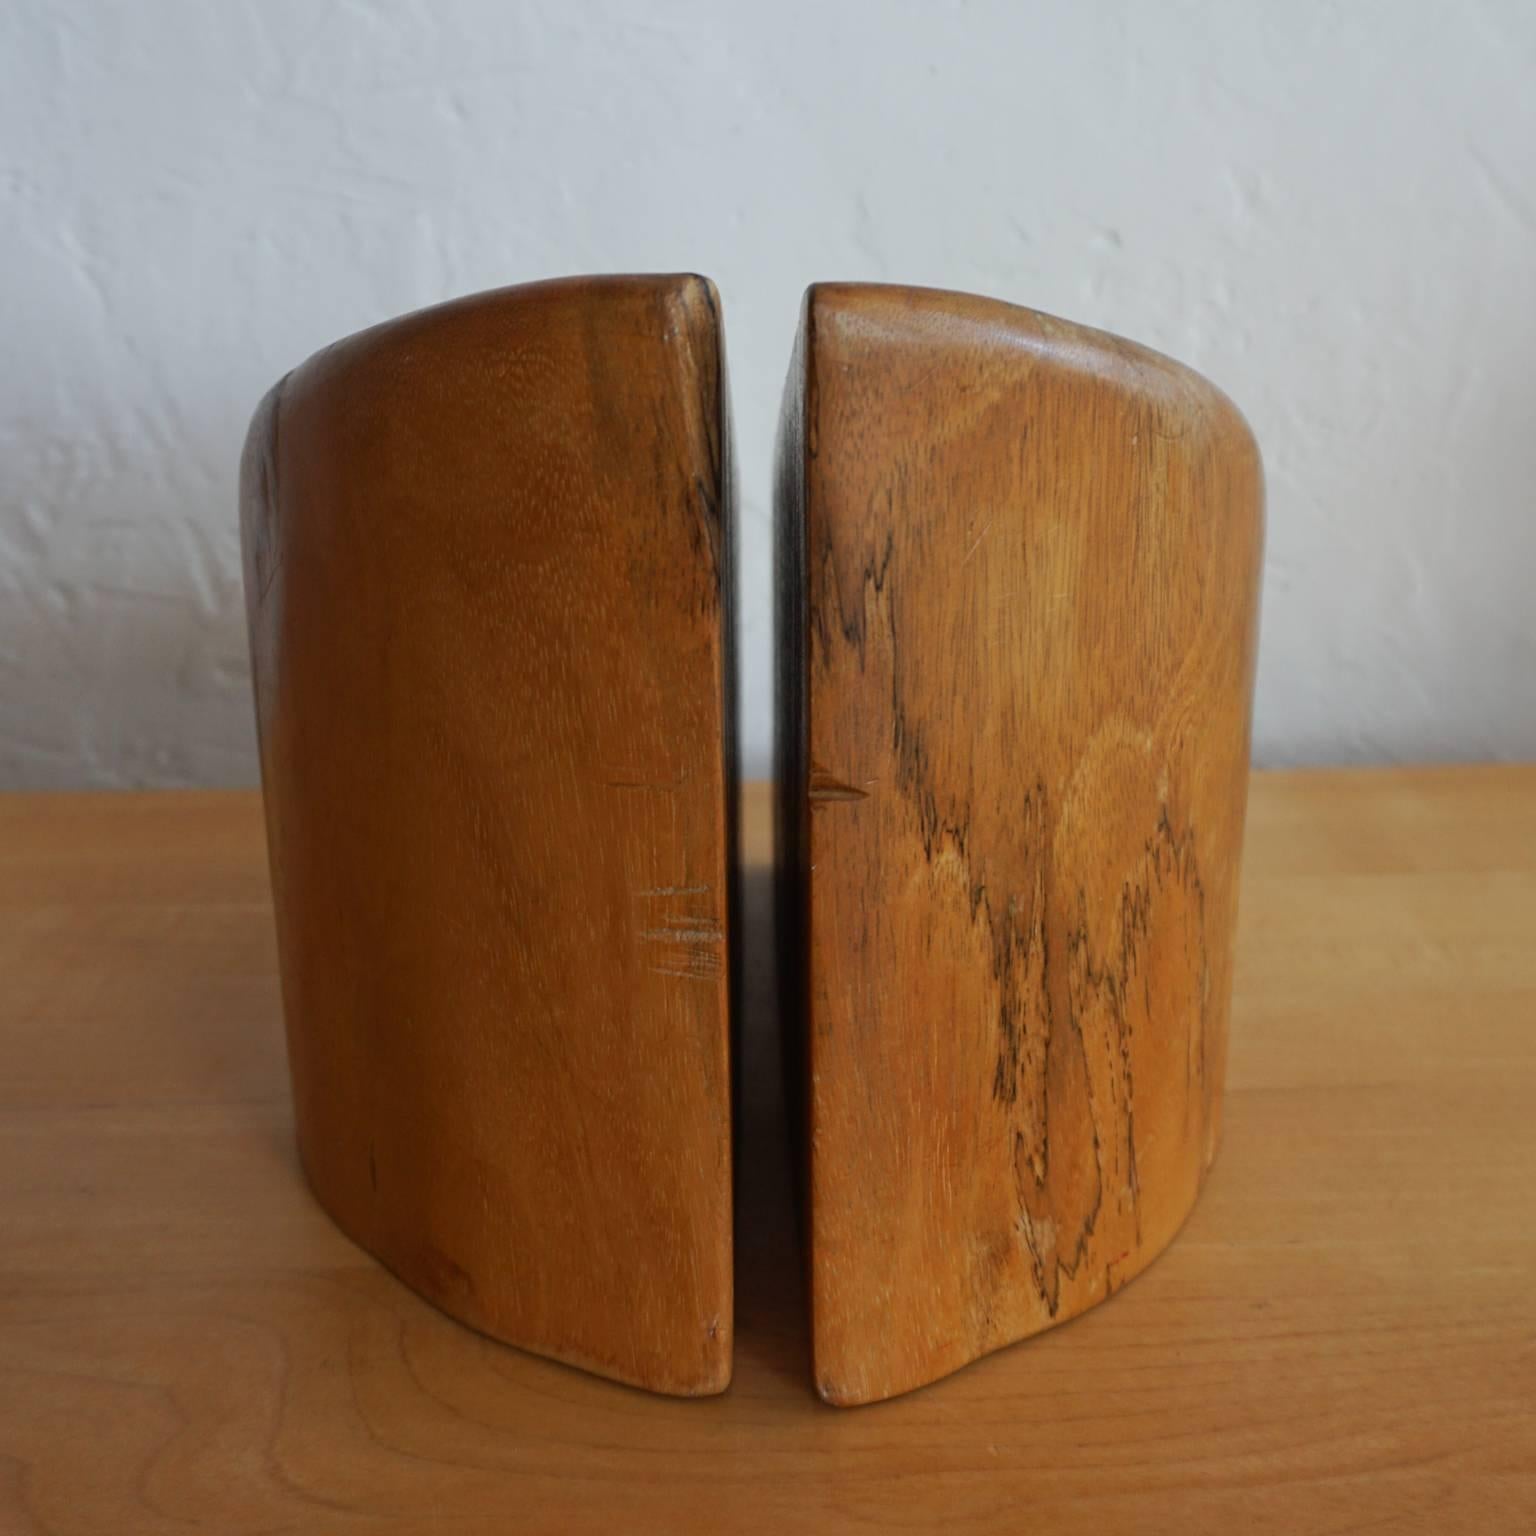 Cocobolo 1960s Mexican Modern Bookends by Don Shoemaker